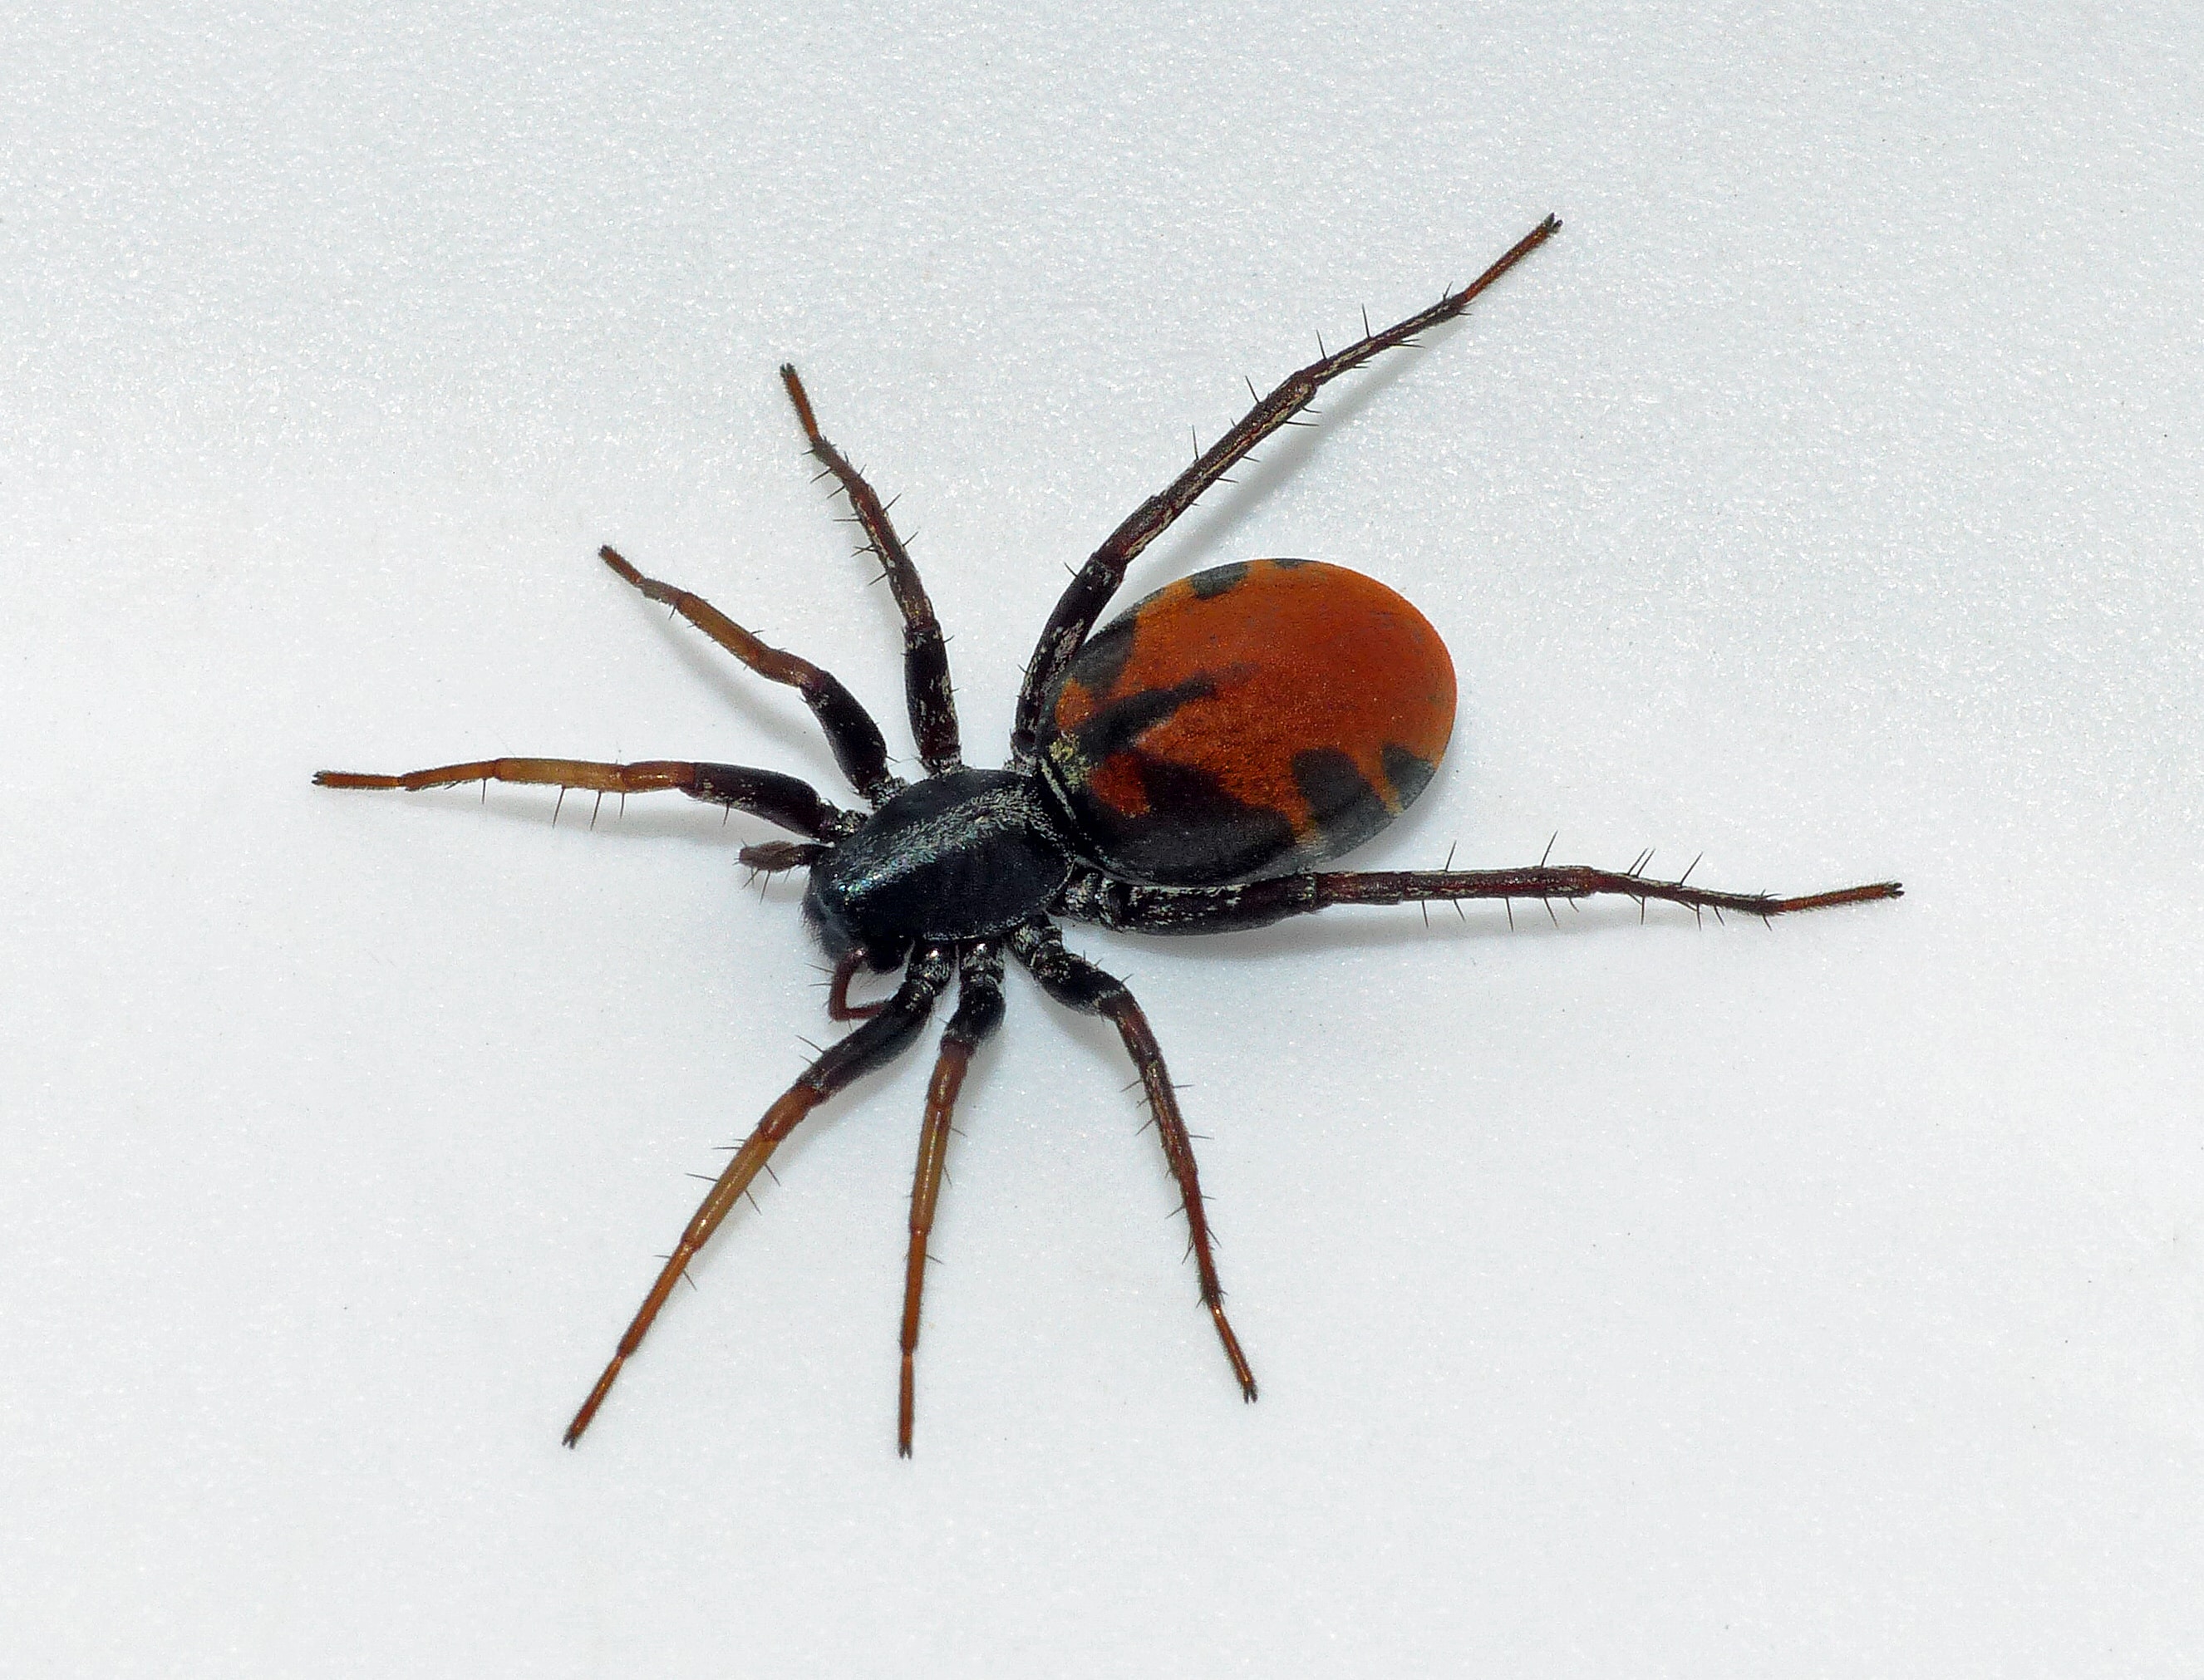 Picture of Castianeira walsinghami - Female - Dorsal